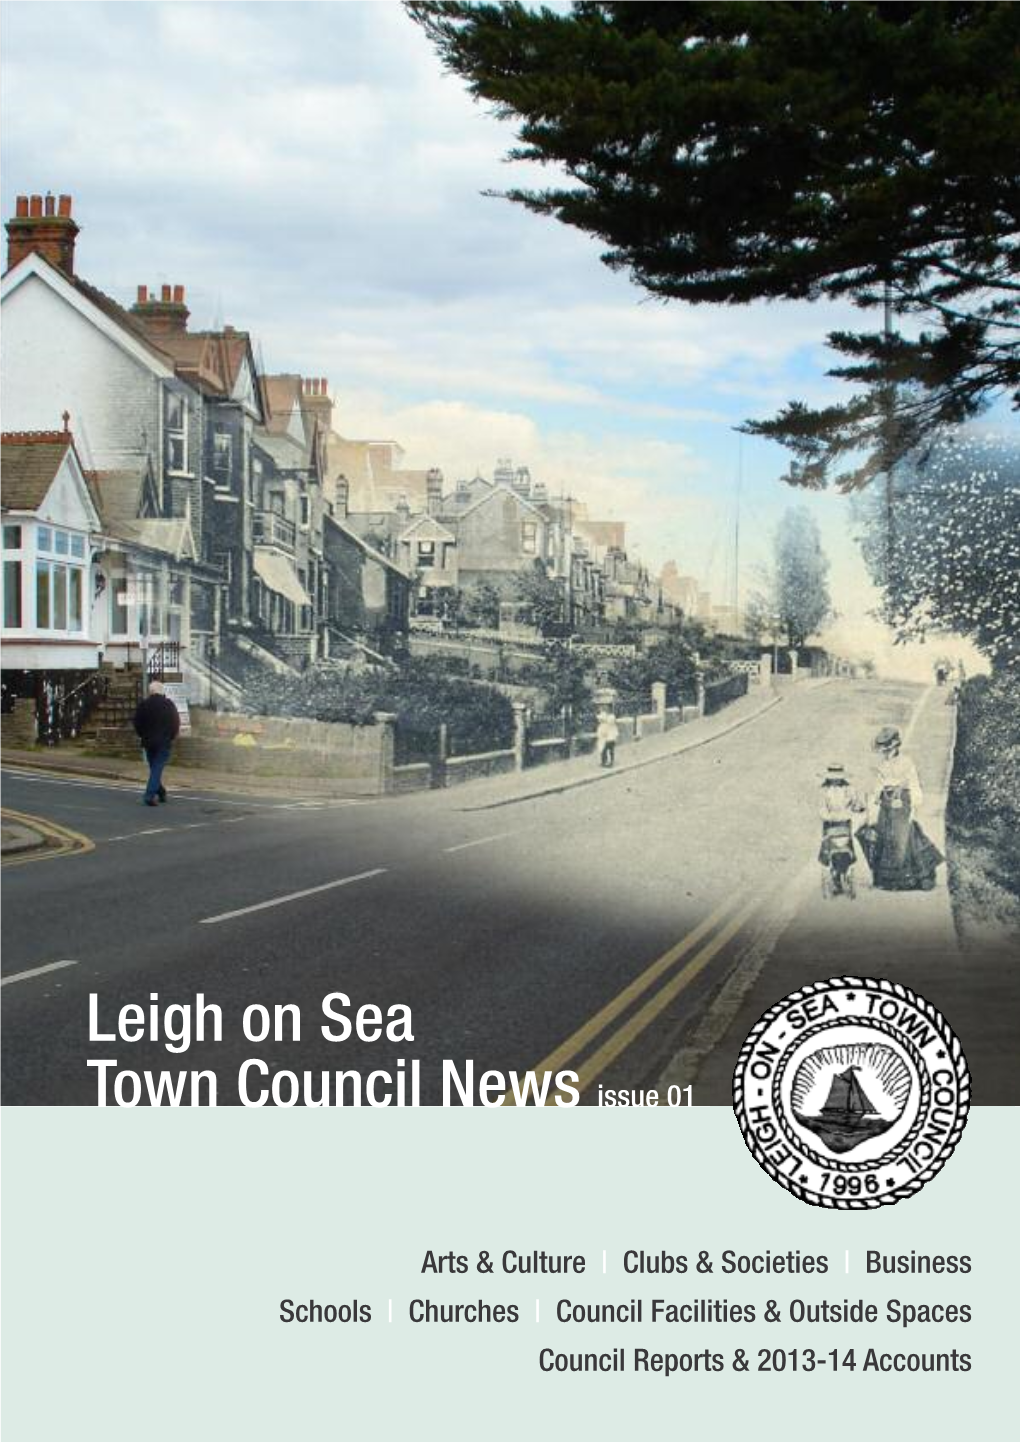 Leigh on Sea Town Council News Issue 01